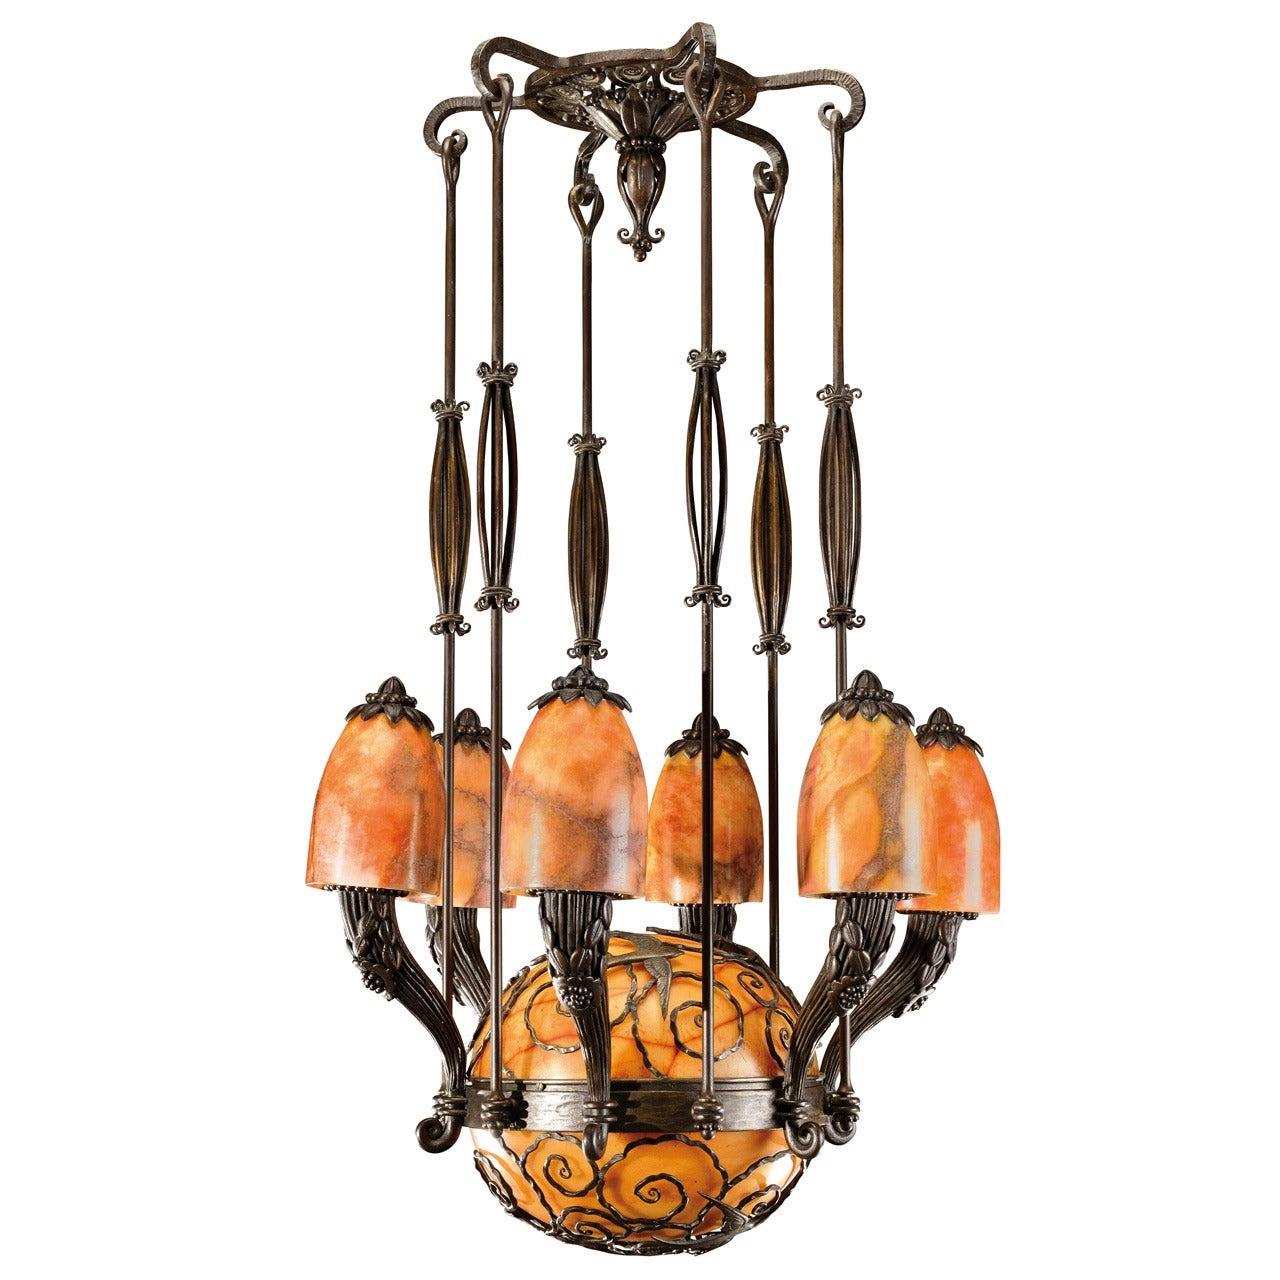 Edgar Brandt Wrought Iron and Alabaster Rare Ceiling Light, circa 1925 For Sale